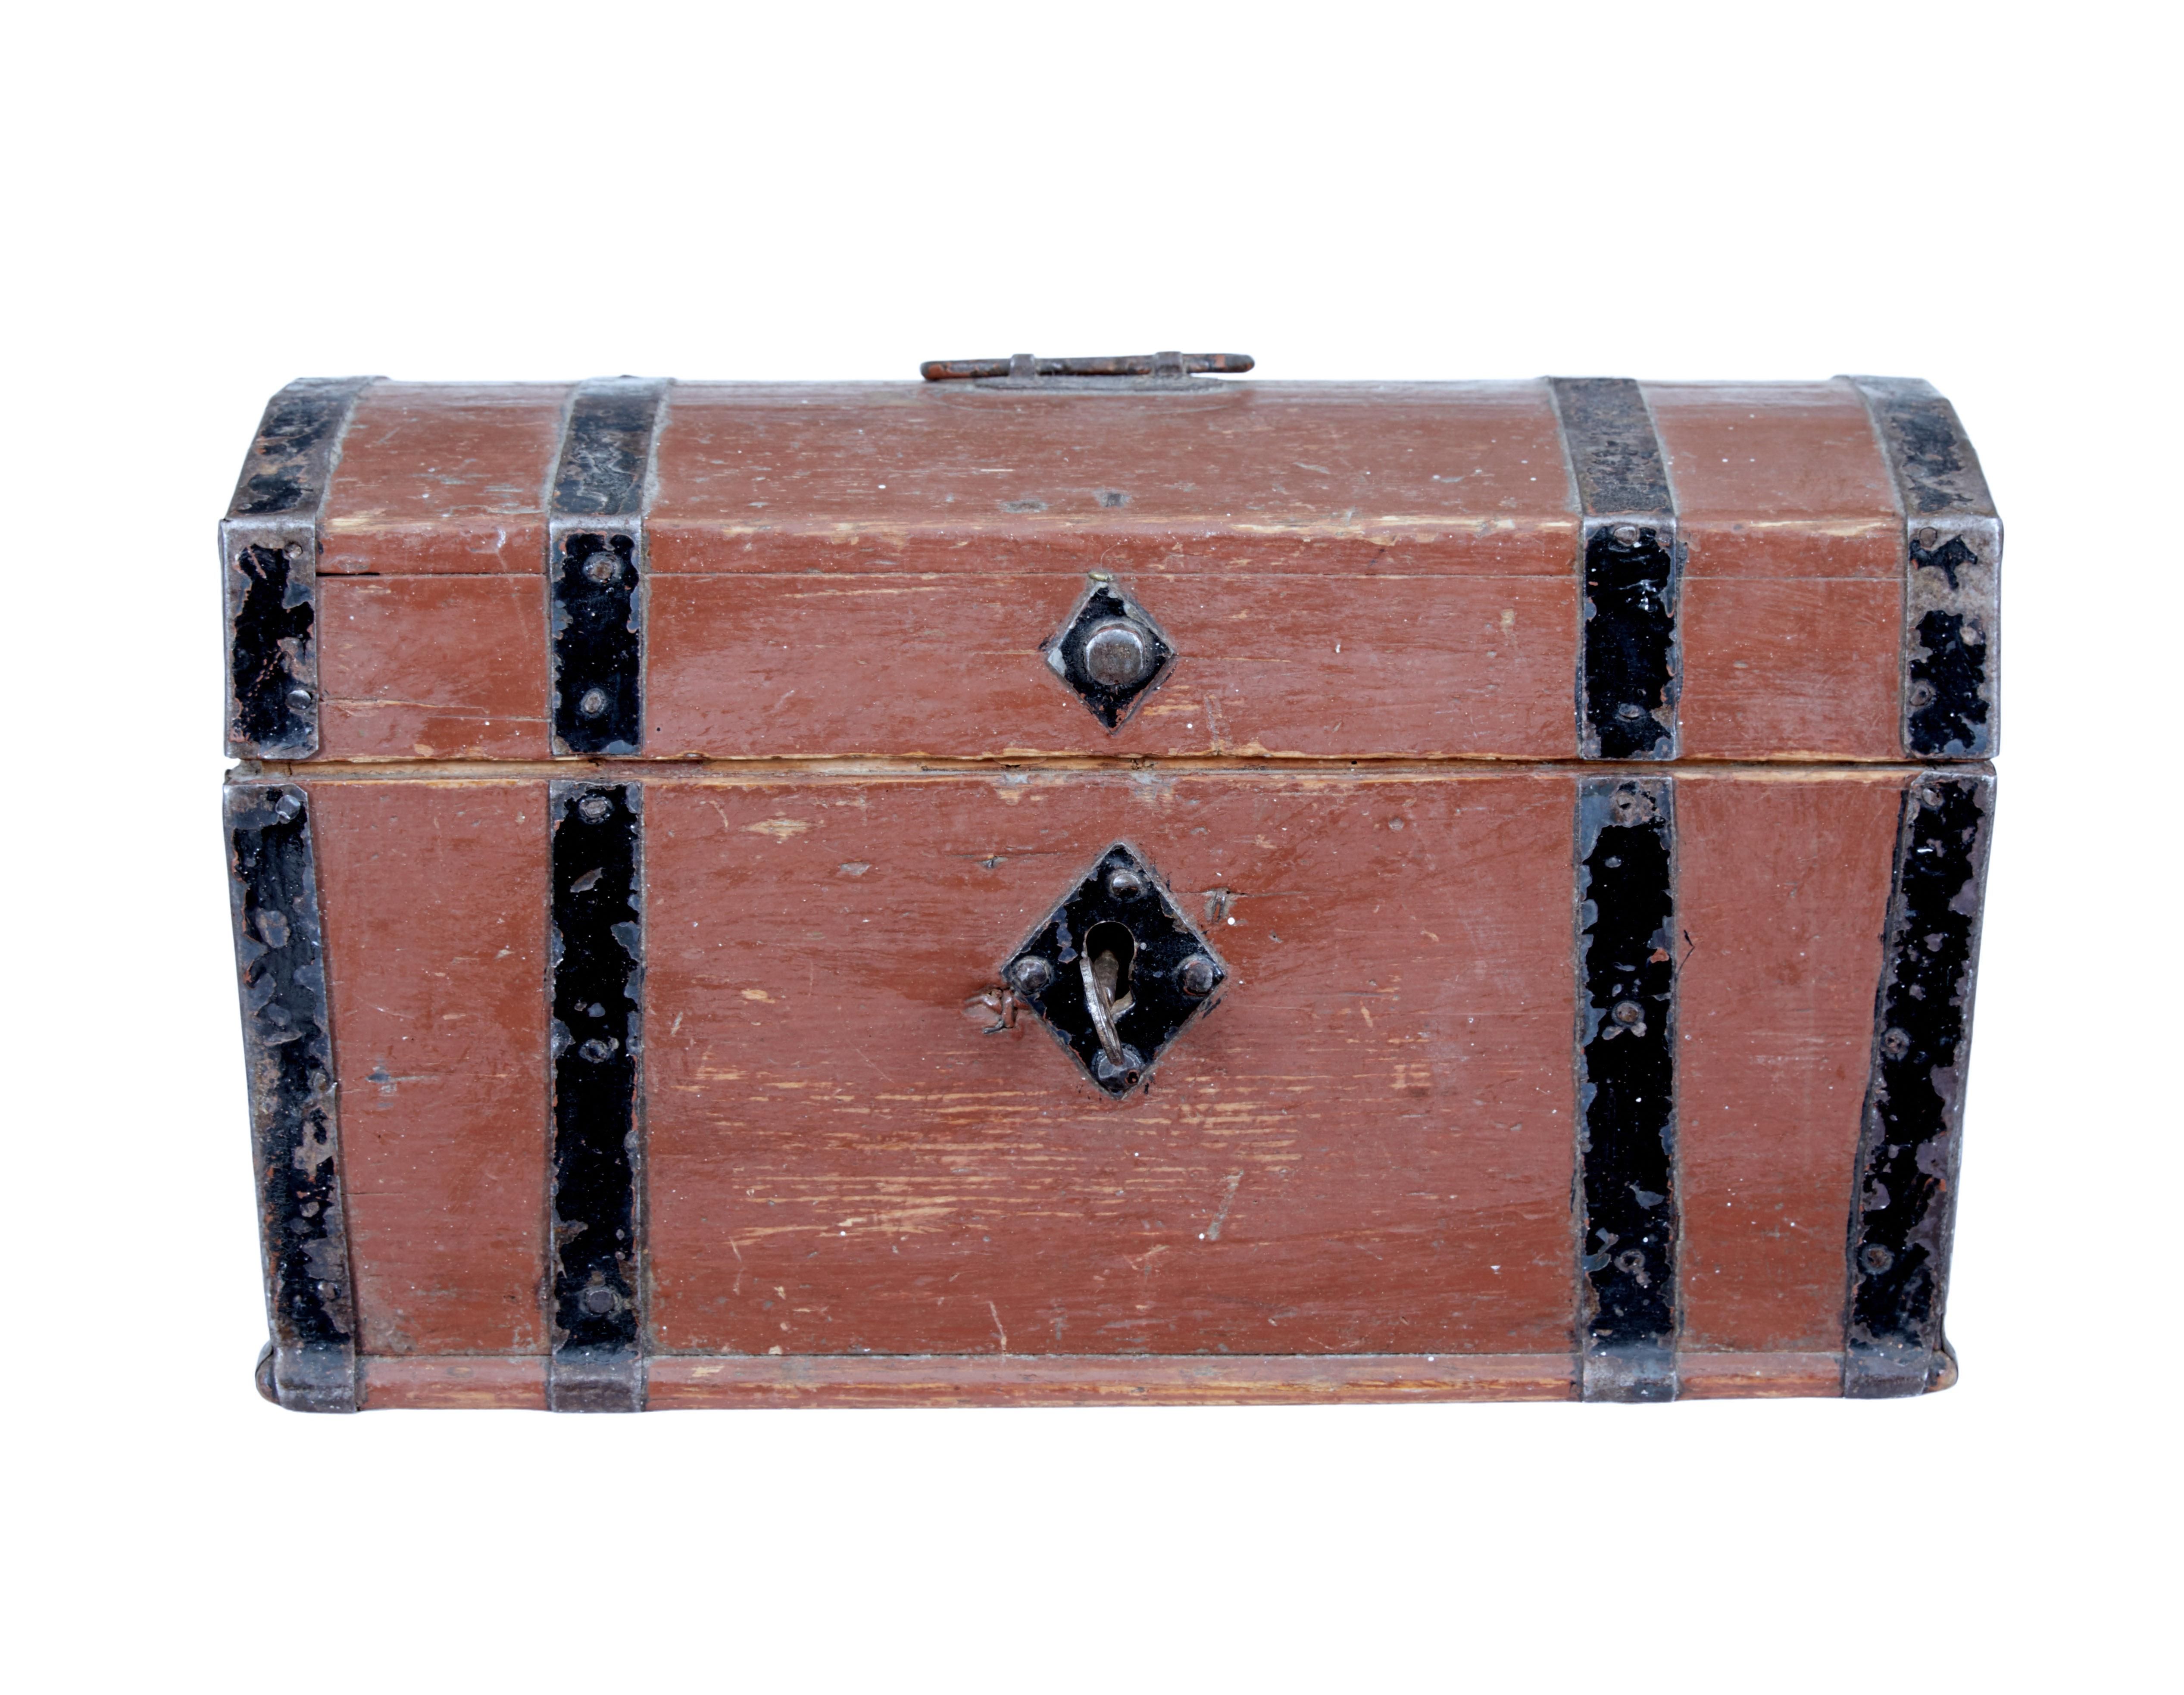 Small Scandinavian 19th century painted pine dome top box circa 1870.

Character painted pine box with black painted strap work and handle. Working lock and key, but is a lock you need to learn with. 

Expected minor losses to woodwork and